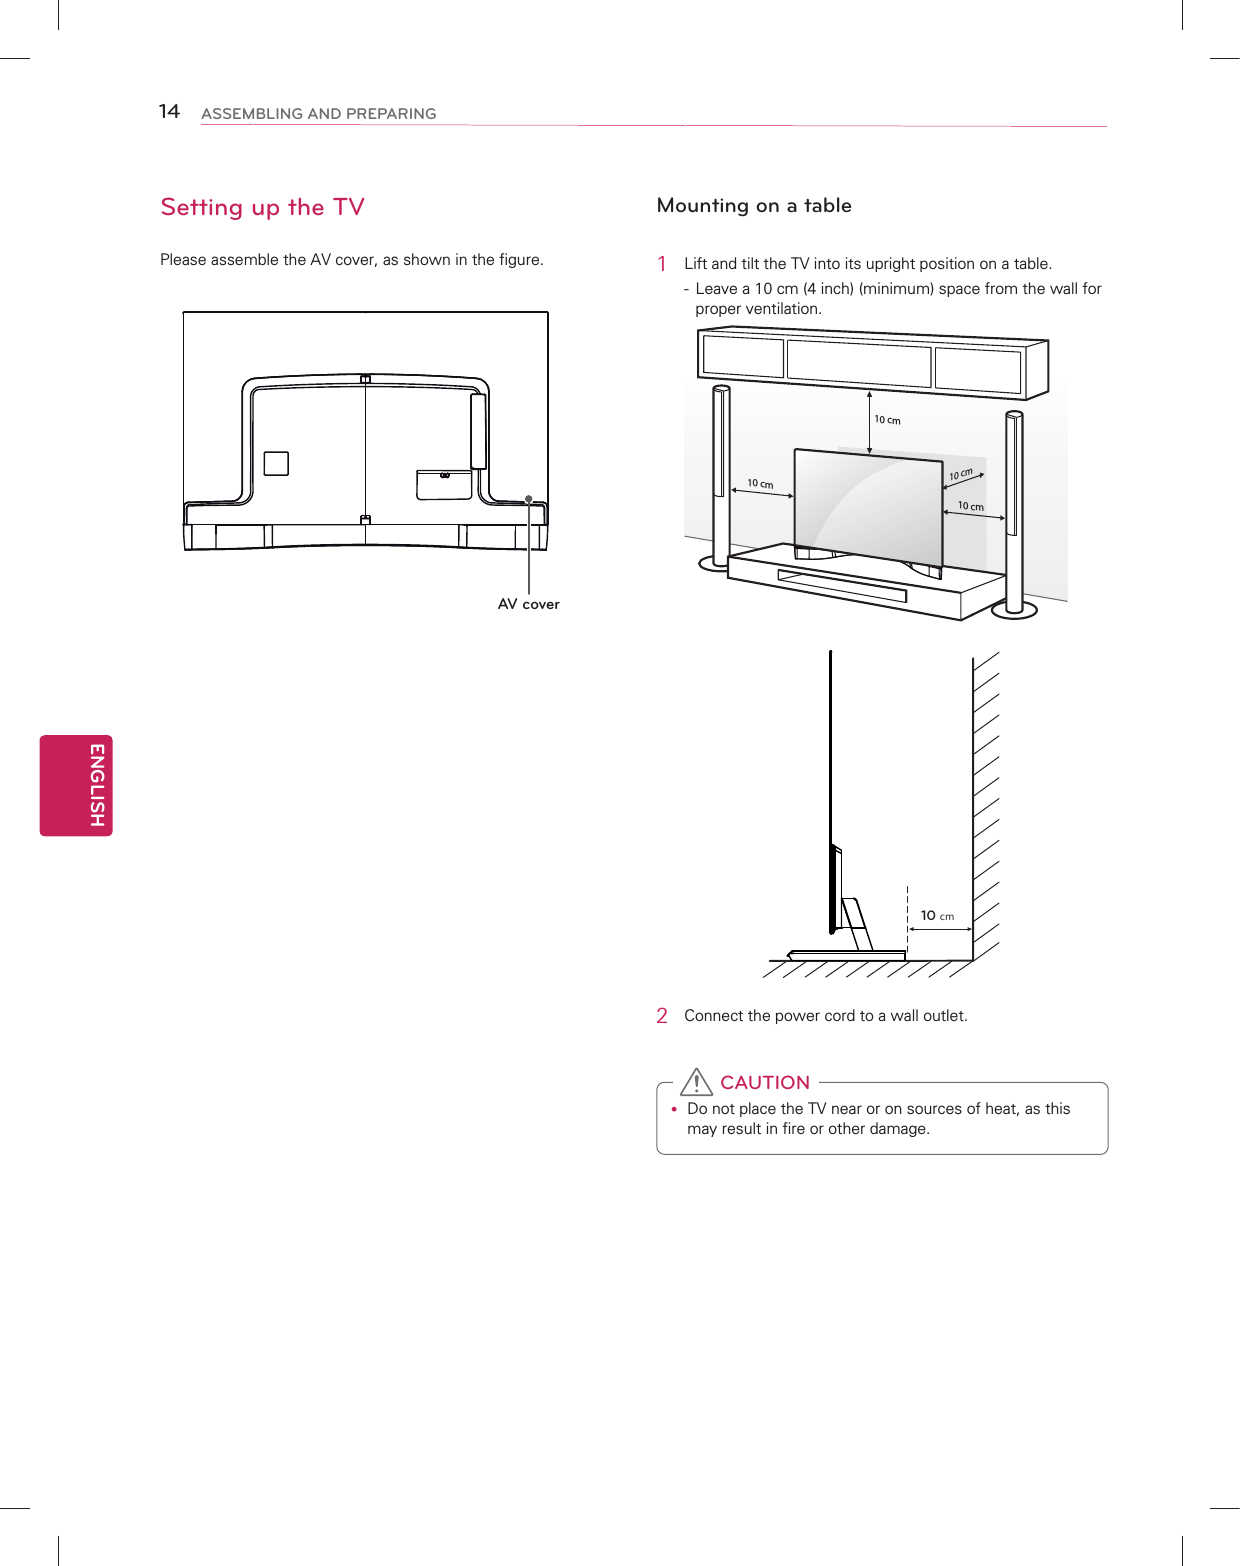 ENGLISH14 ASSEMBLING AND PREPARINGSetting up the TVPlease assemble the AV cover, as shown in the figure.AV coverMounting on a table1  Lift and tilt the TV into its upright position on a table.-  Leave a 10 cm (4 inch) (minimum) space from the wall for proper ventilation.10 cm10 cm10 cm10 cm10 cm2  Connect the power cord to a wall outlet.y Do not place the TV near or on sources of heat, as this may result in fire or other damage. CAUTION